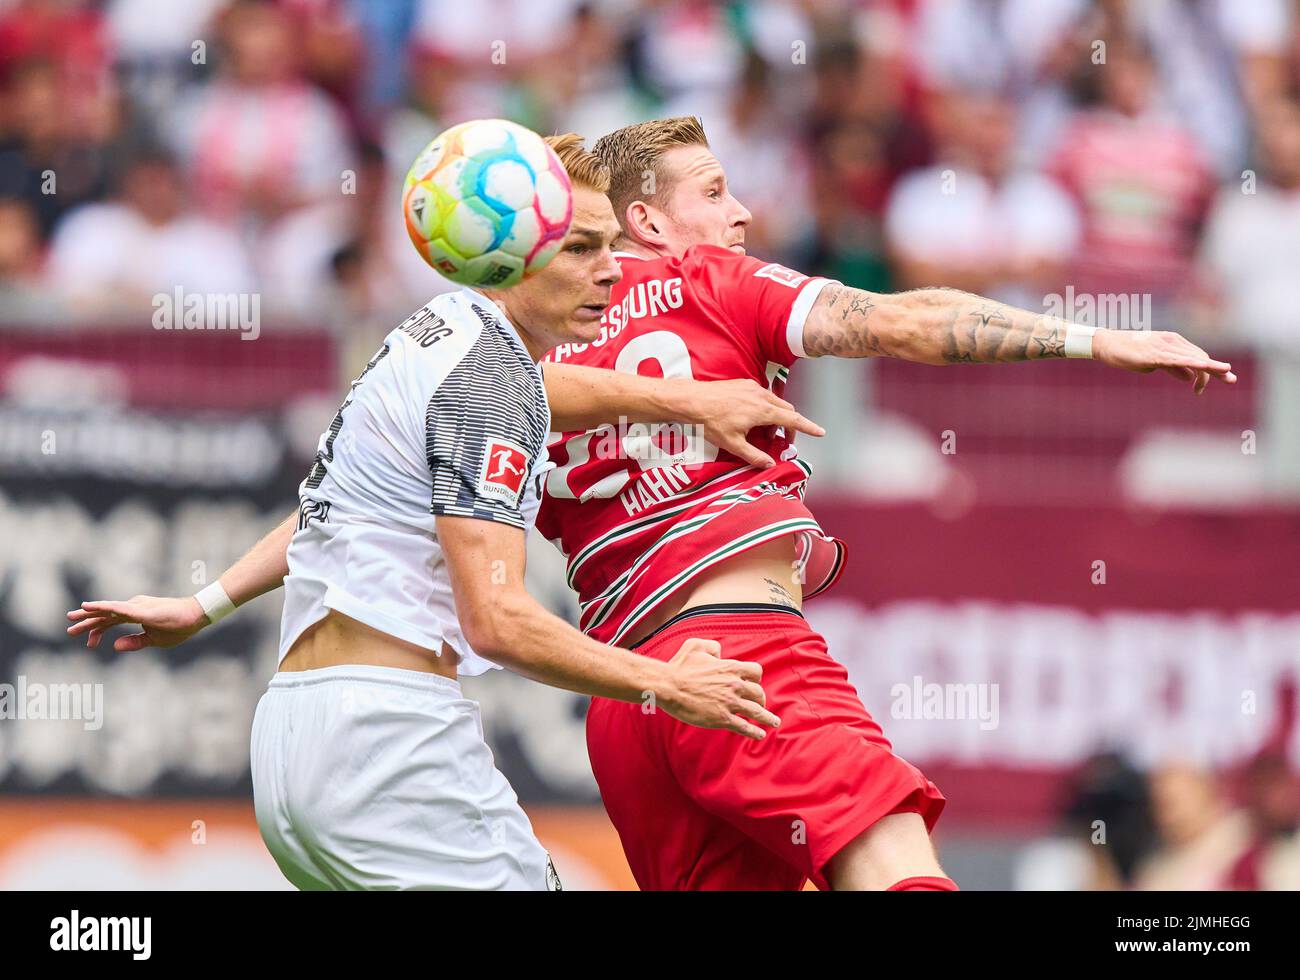 Marc Philipp LIENHART, FRG 3 im Kopfballduell , Kopfball mit Andre HAHN, FCA 28  in the match FC AUGSBURG - SC FREIBURG 1.German Football League on Aug 06, 2022 in Augsburg, Germany. Season 2022/2023, matchday 1, 1.Bundesliga, FCB, Munich, 1.Spieltag © Peter Schatz / Alamy Live News    - DFL REGULATIONS PROHIBIT ANY USE OF PHOTOGRAPHS as IMAGE SEQUENCES and/or QUASI-VIDEO - Stock Photo